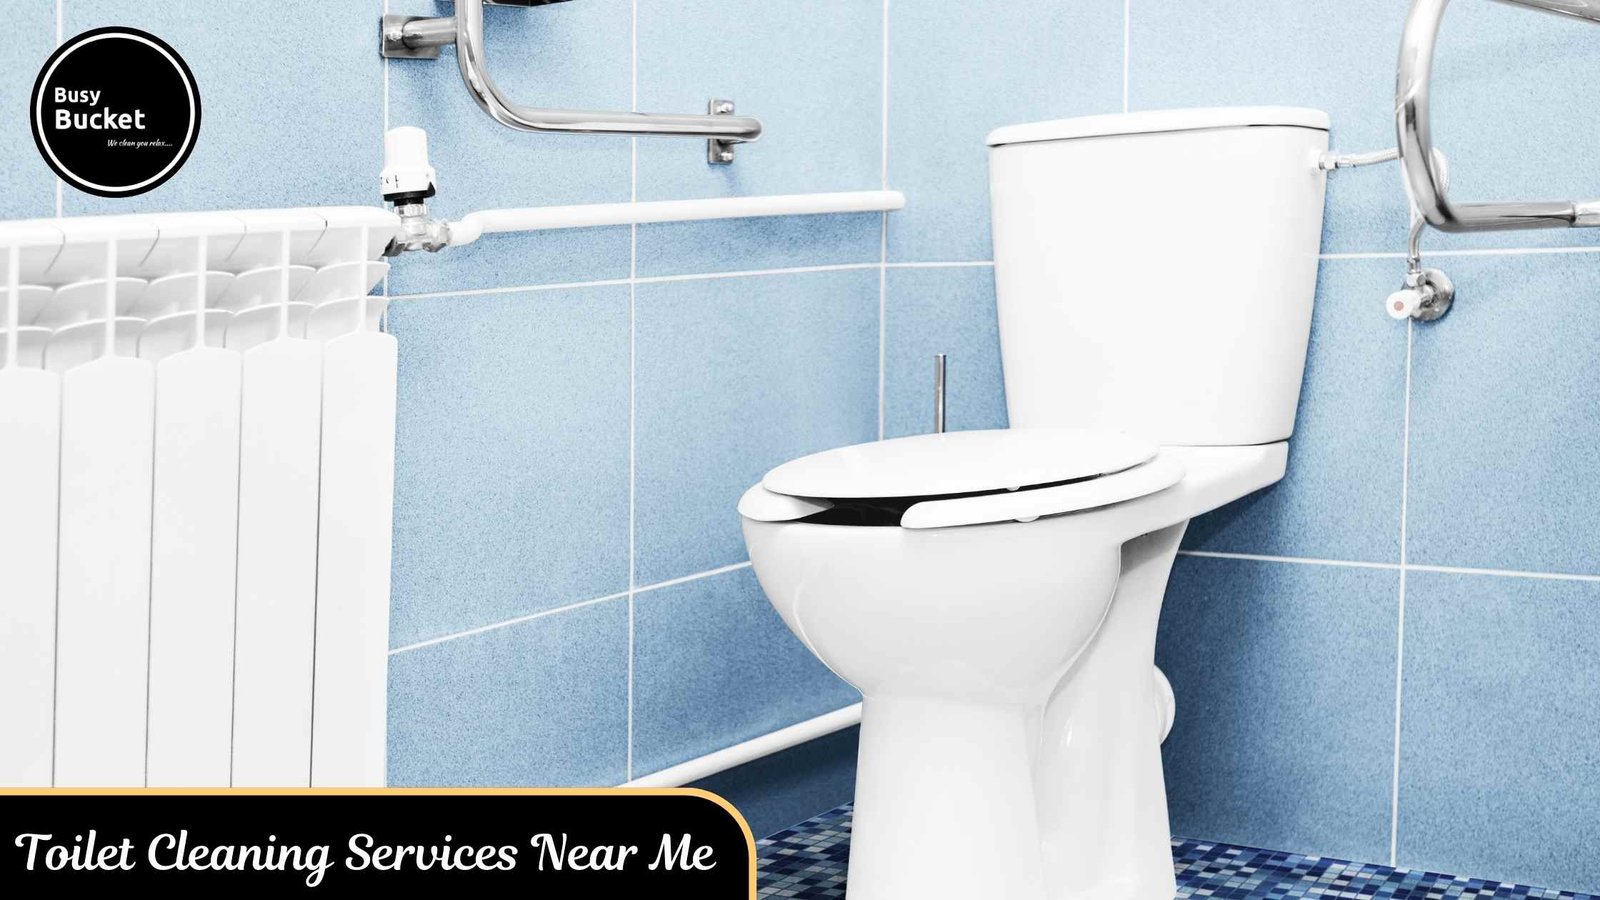 Toilet Cleaning Services Near Me